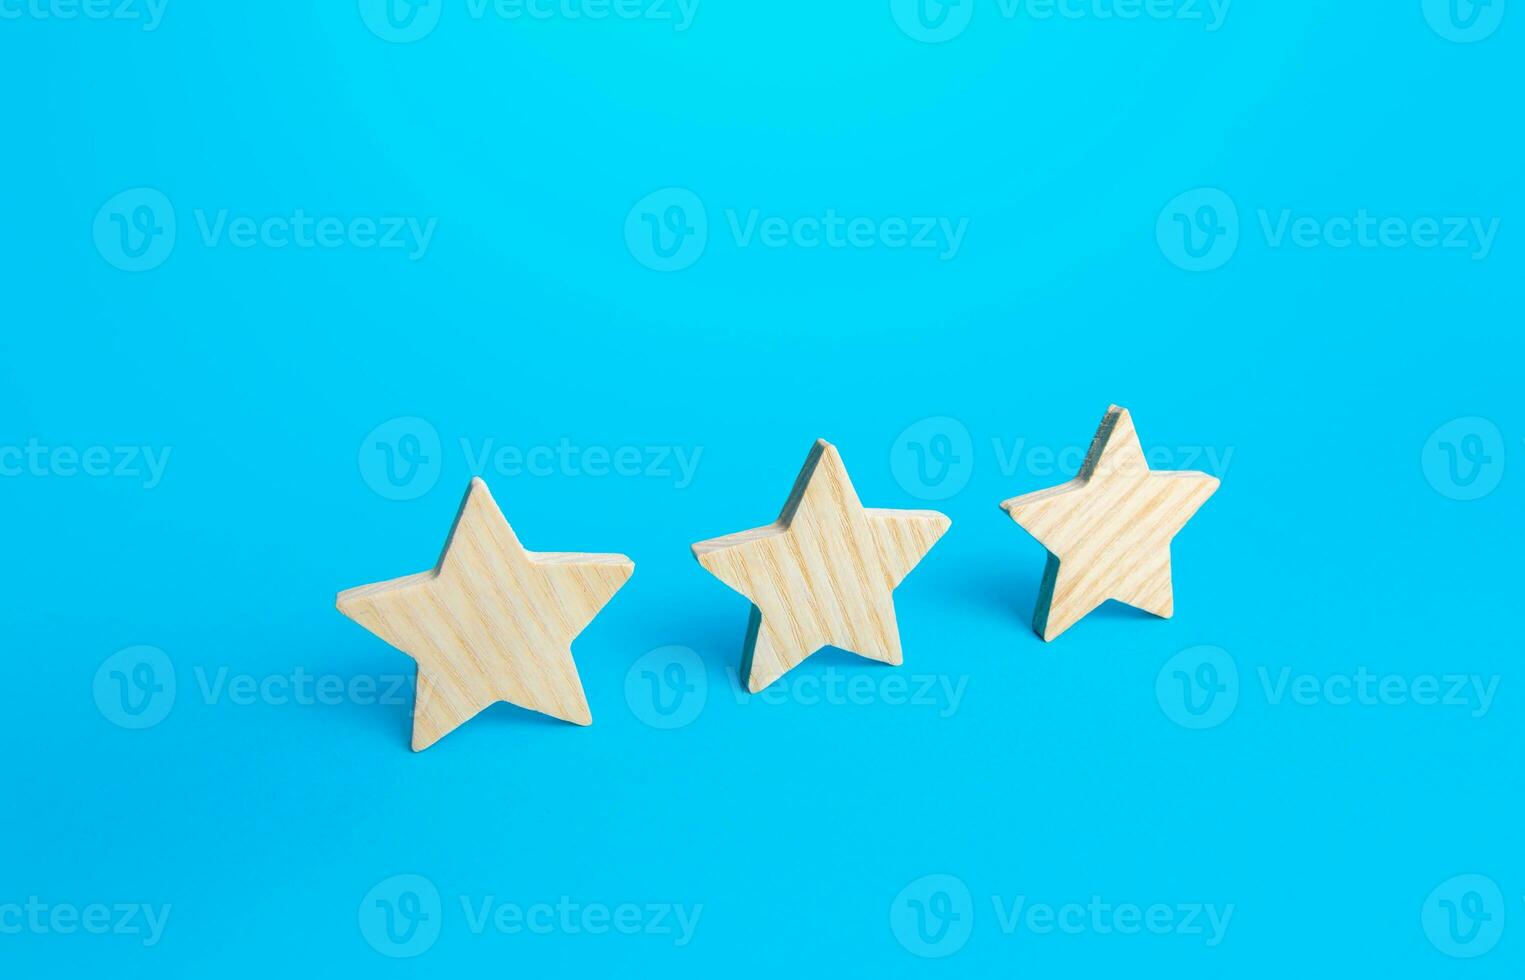 Three stars on a blue background. Rating evaluation concept. Service quality. Buyer feedback. High satisfaction. Popularity rating of a restaurant, hotel or mobile applications. Good reputation status photo